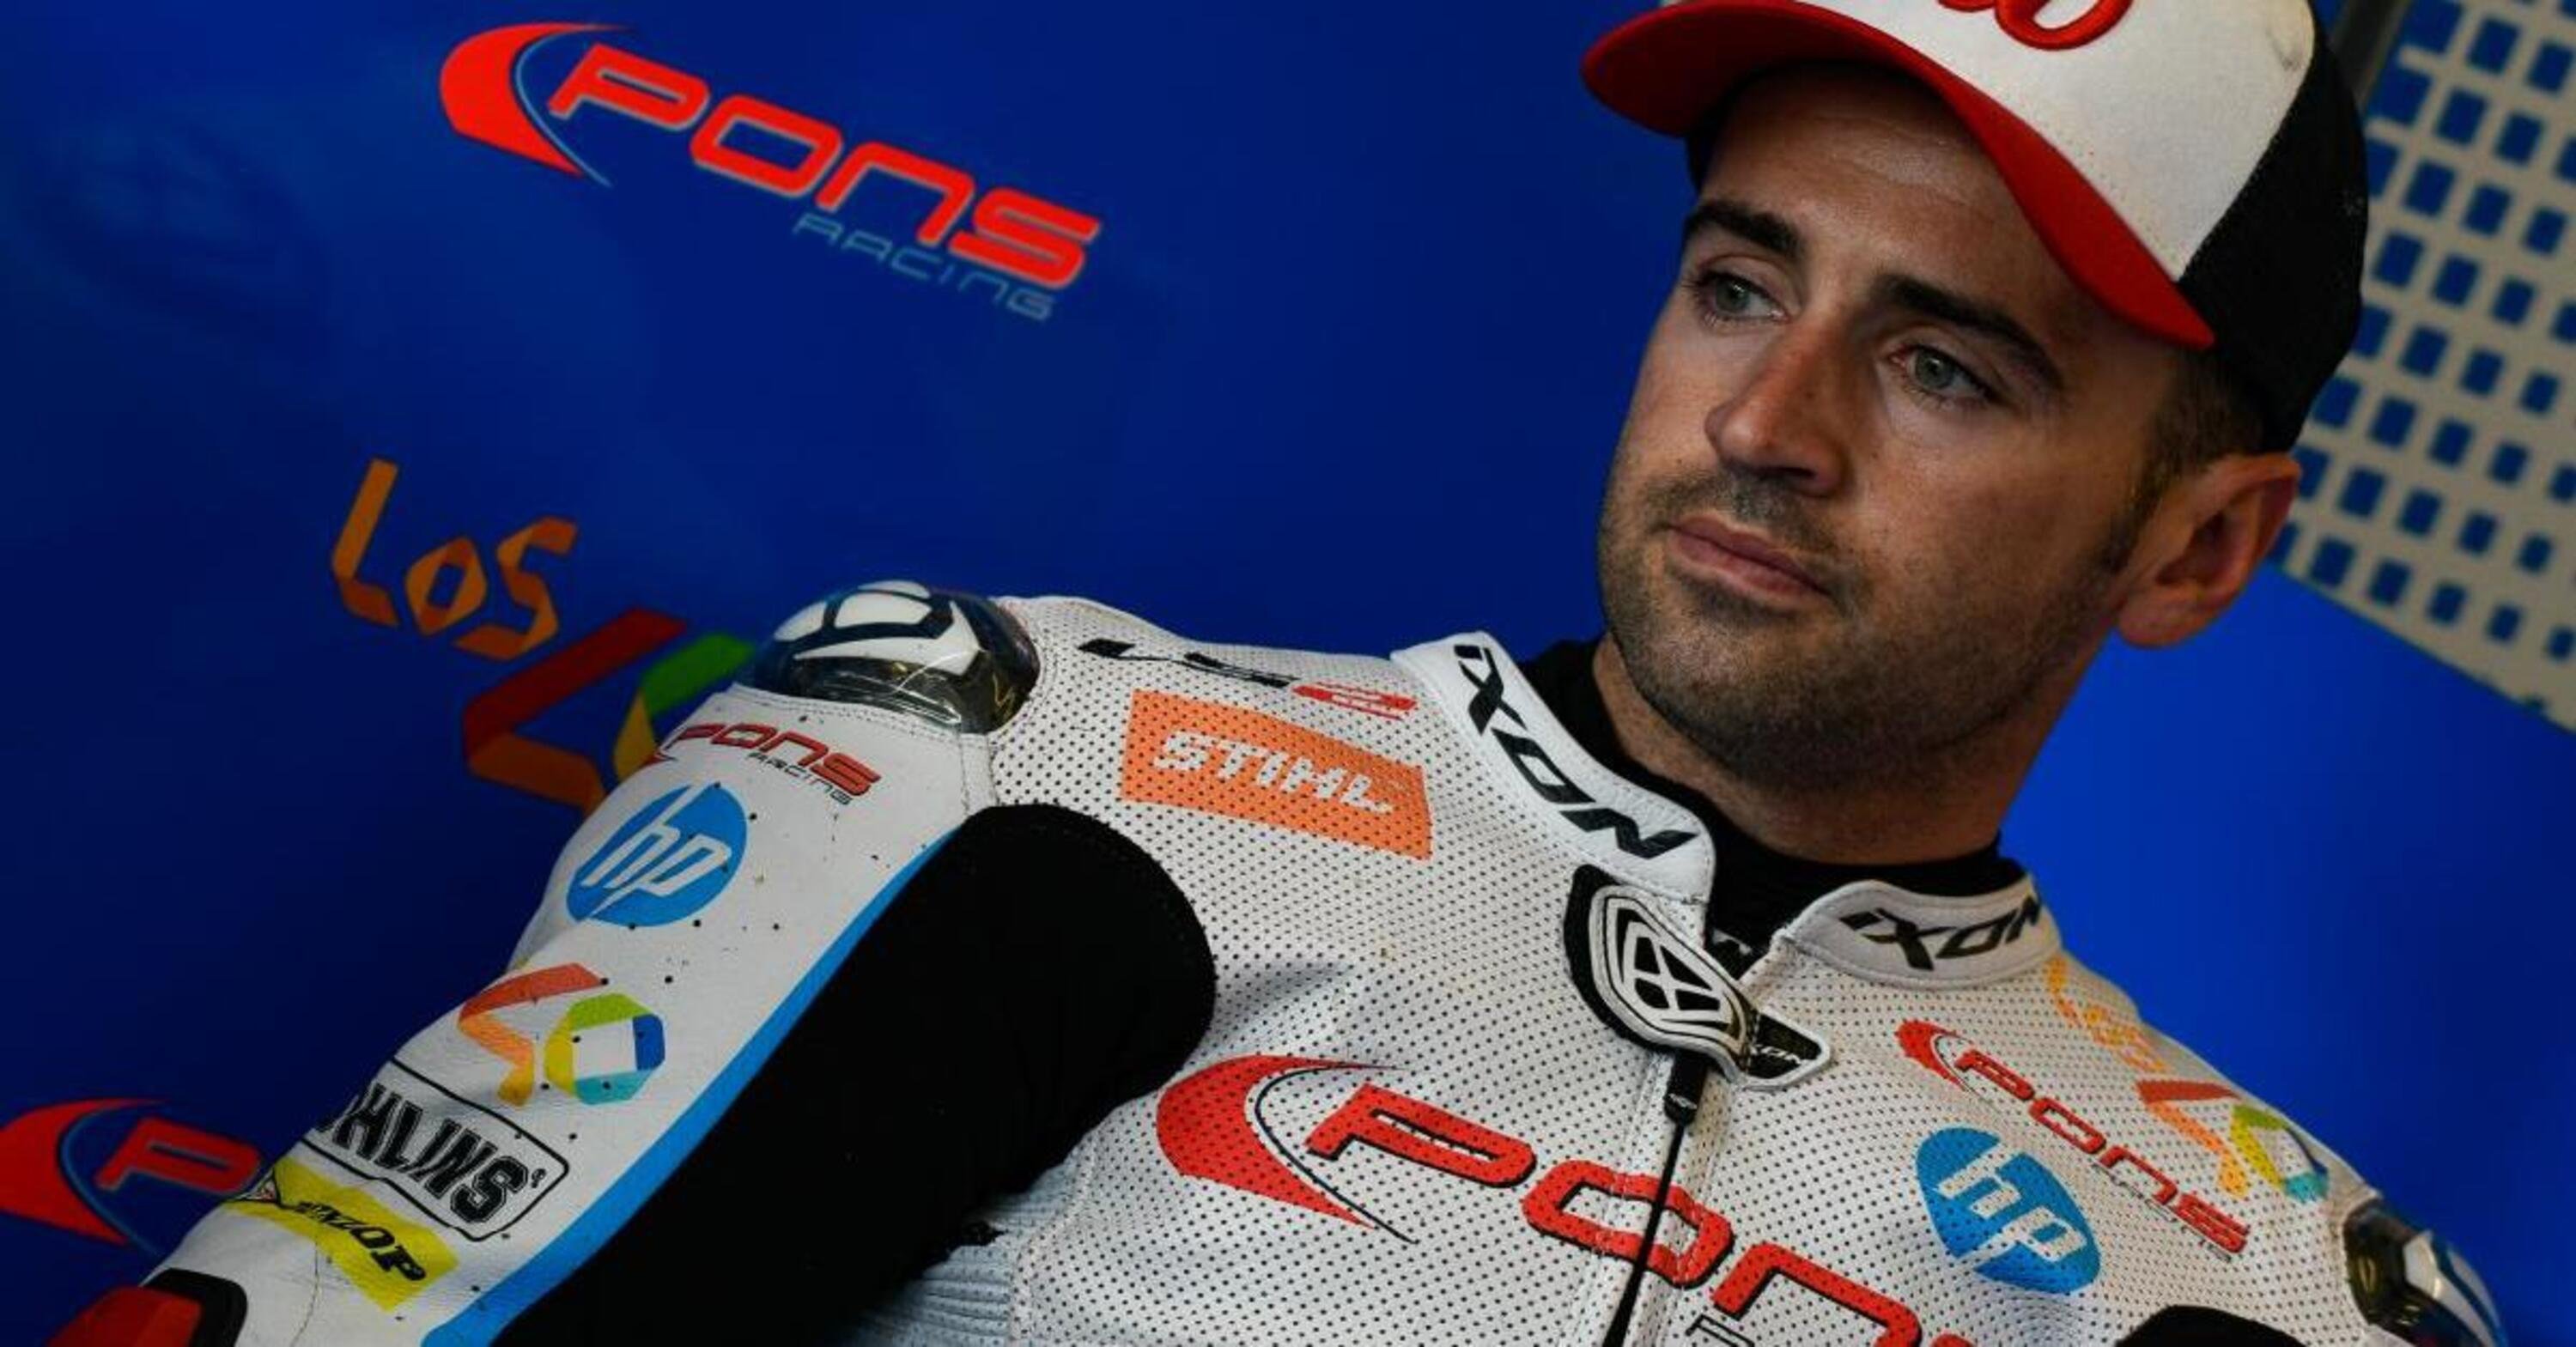 H&eacute;ctor  Barber&aacute; in Supersport con Puccetti?